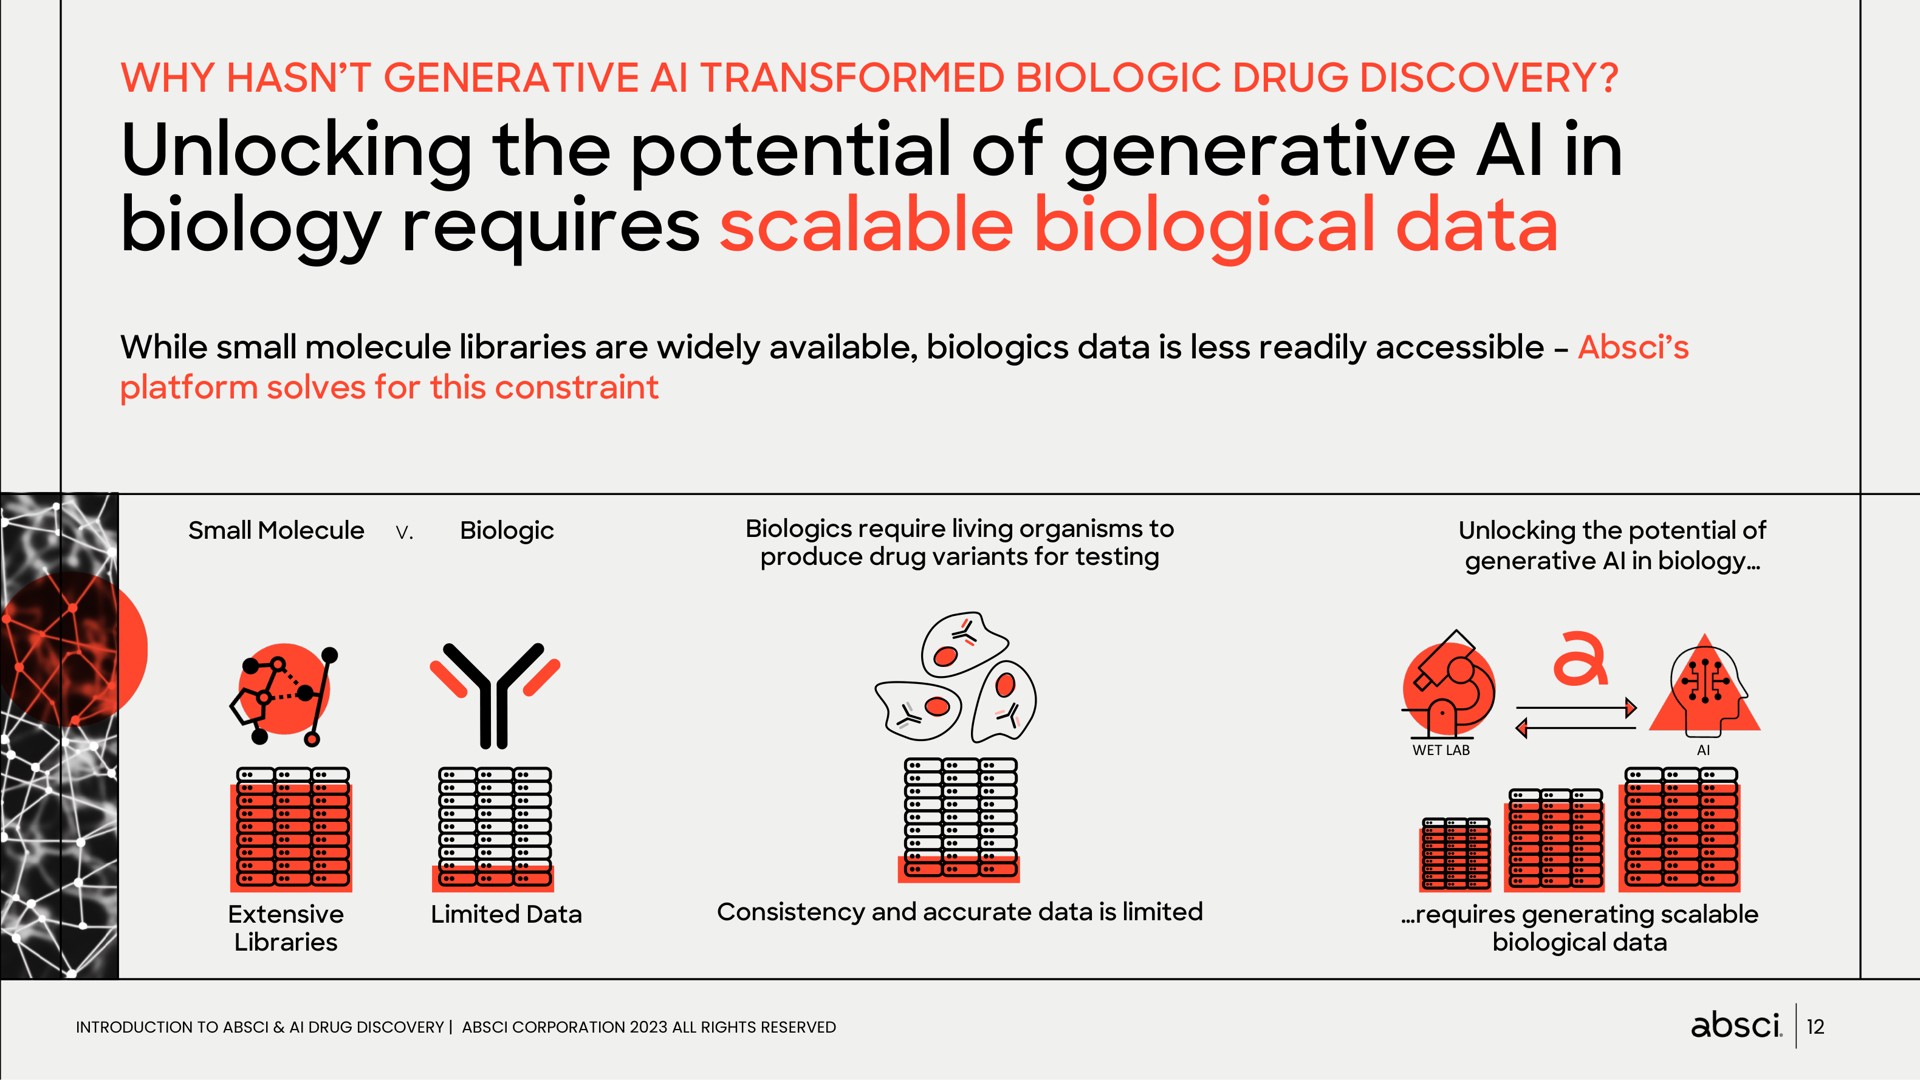 why generative transformed biologic drug discovery unlocking the potential of generative in biology requires scalable biological data | Absci